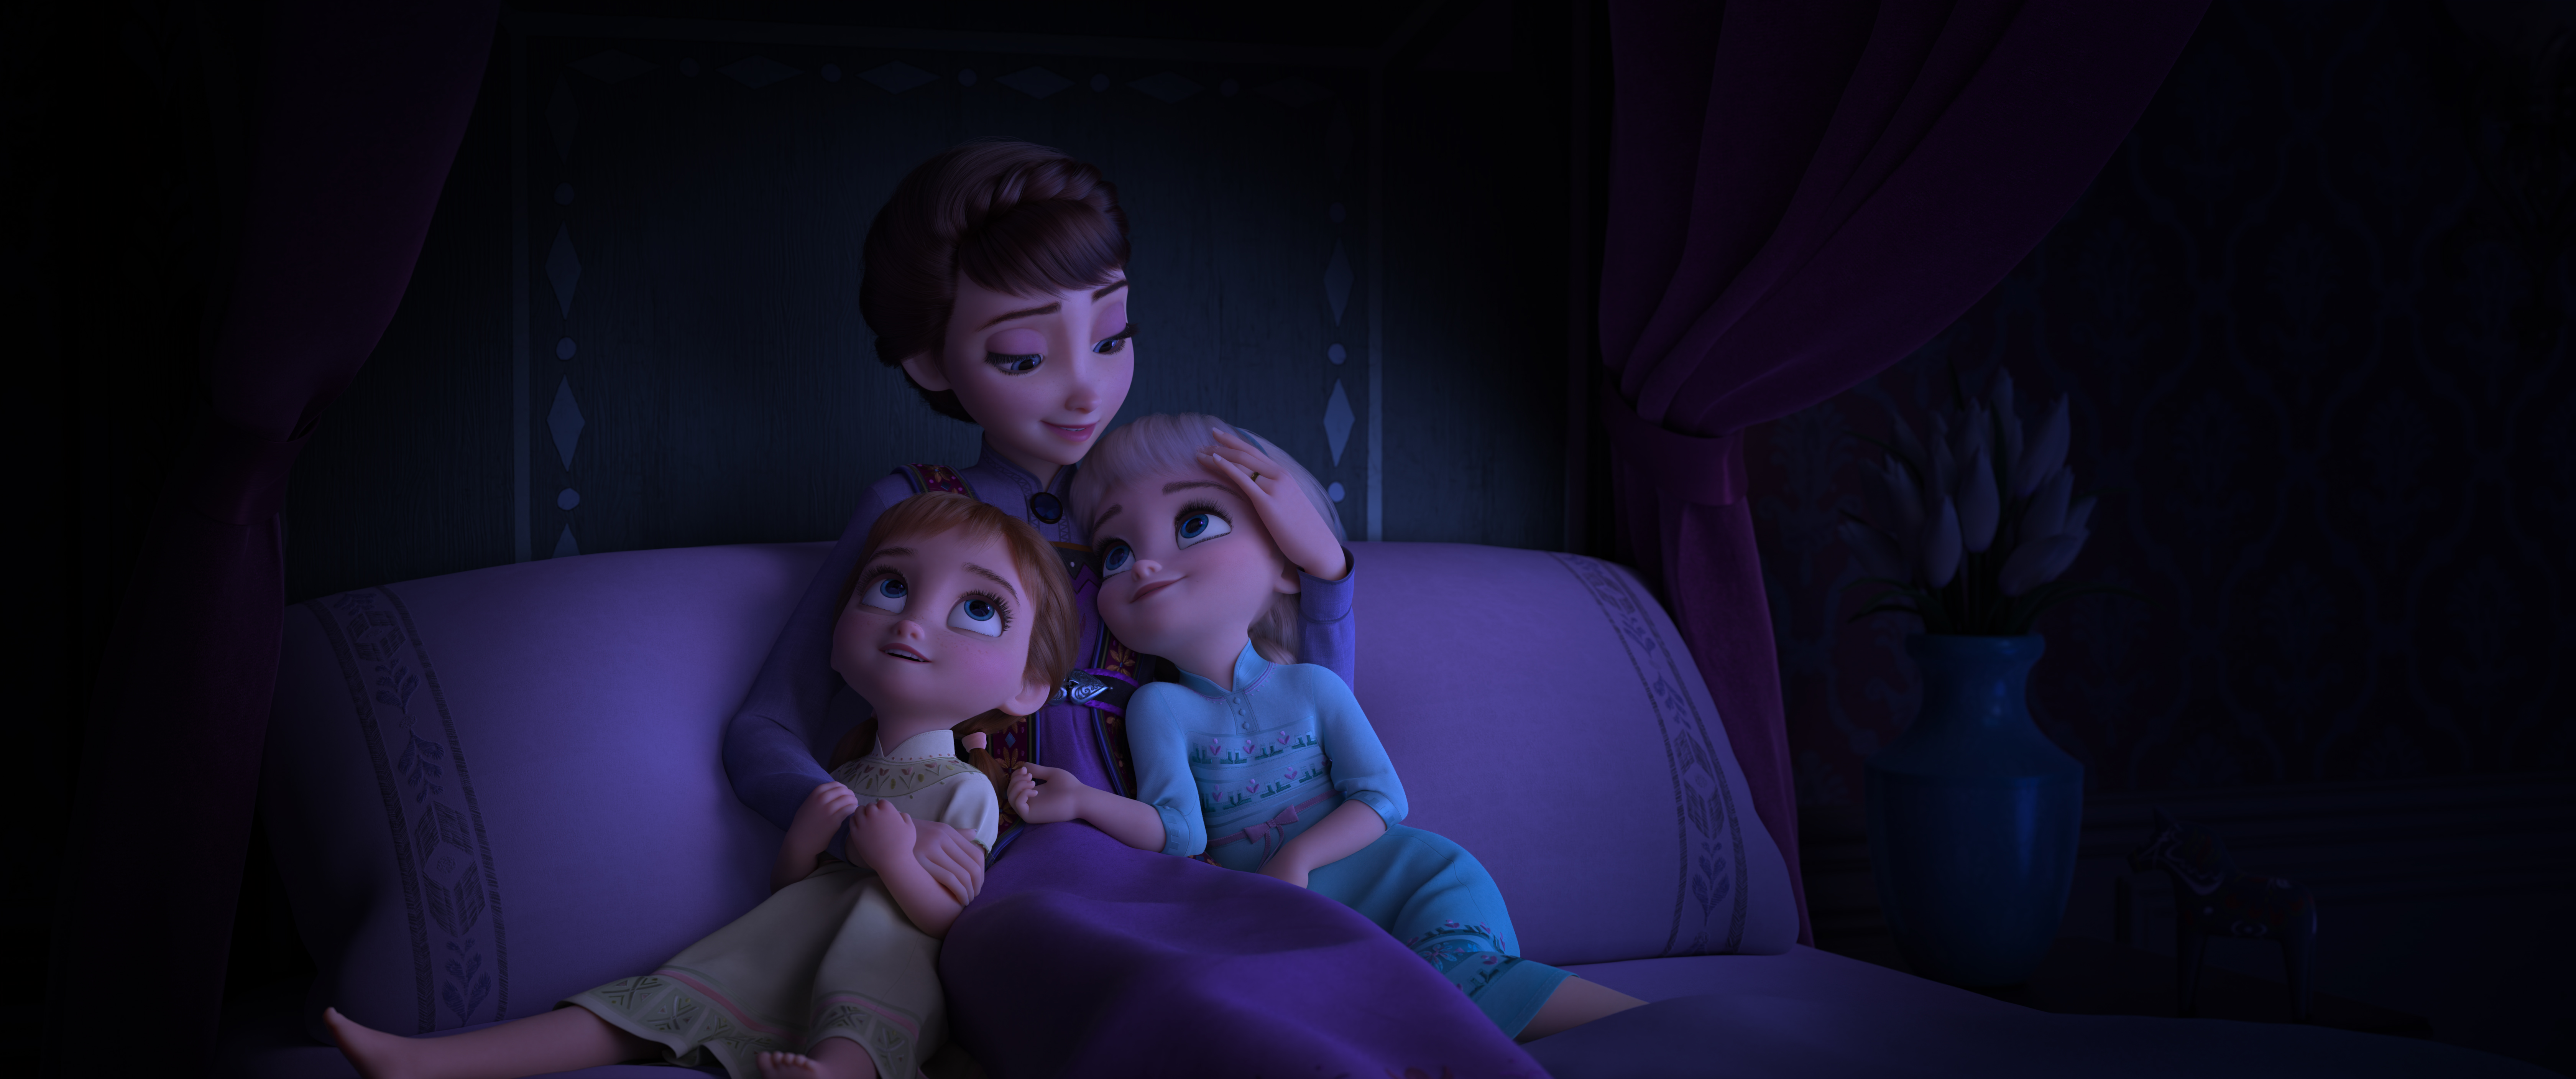 Queen Iduna with Anna and Elsa in Frozen 2